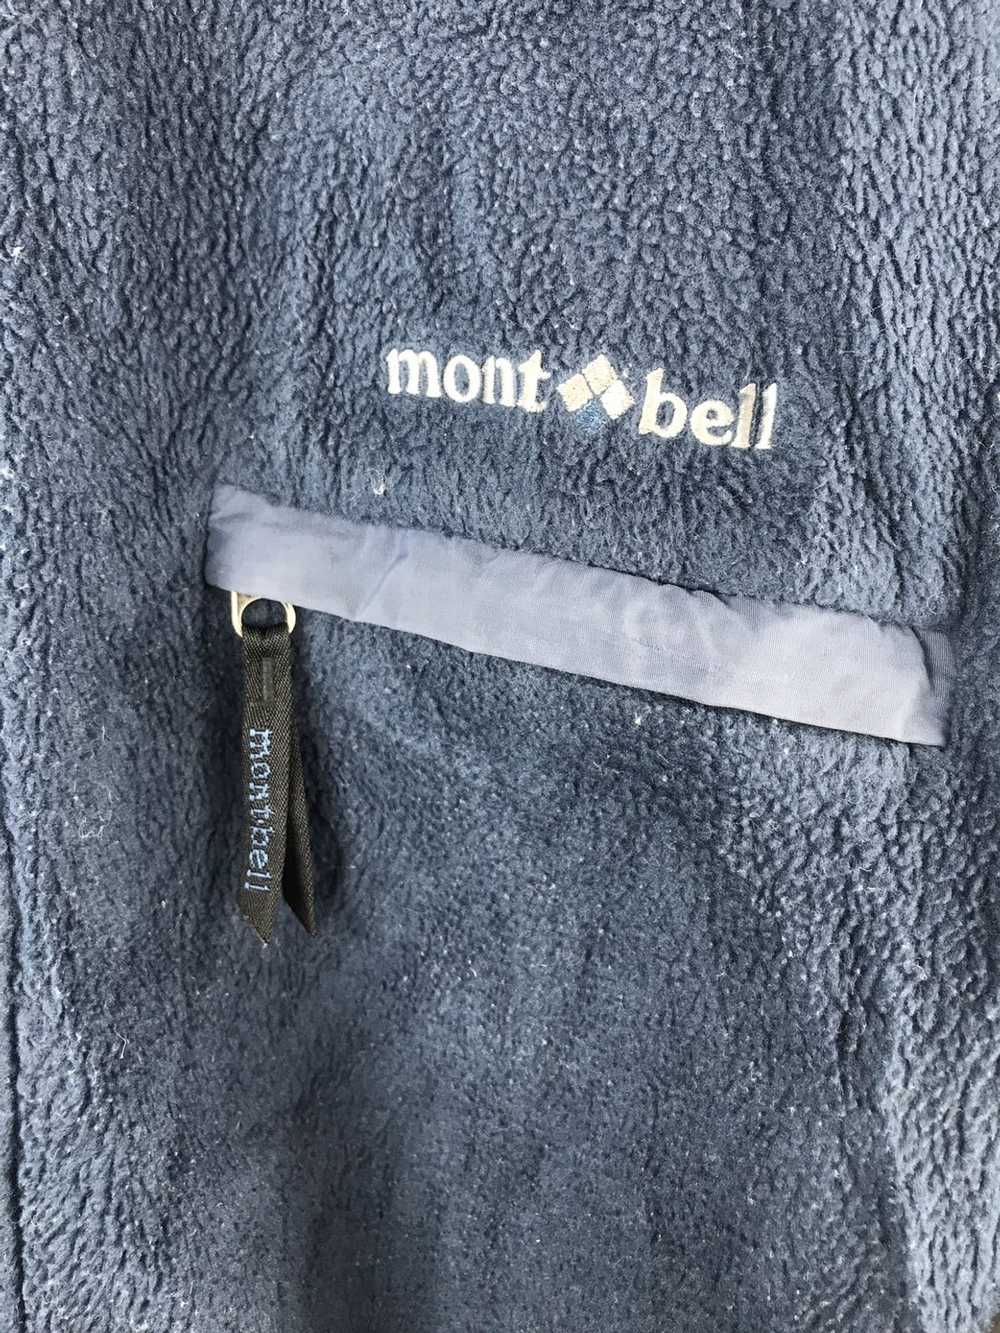 Montbell MONT BELL x VINTAGE x JAPANESE BRAND - image 8